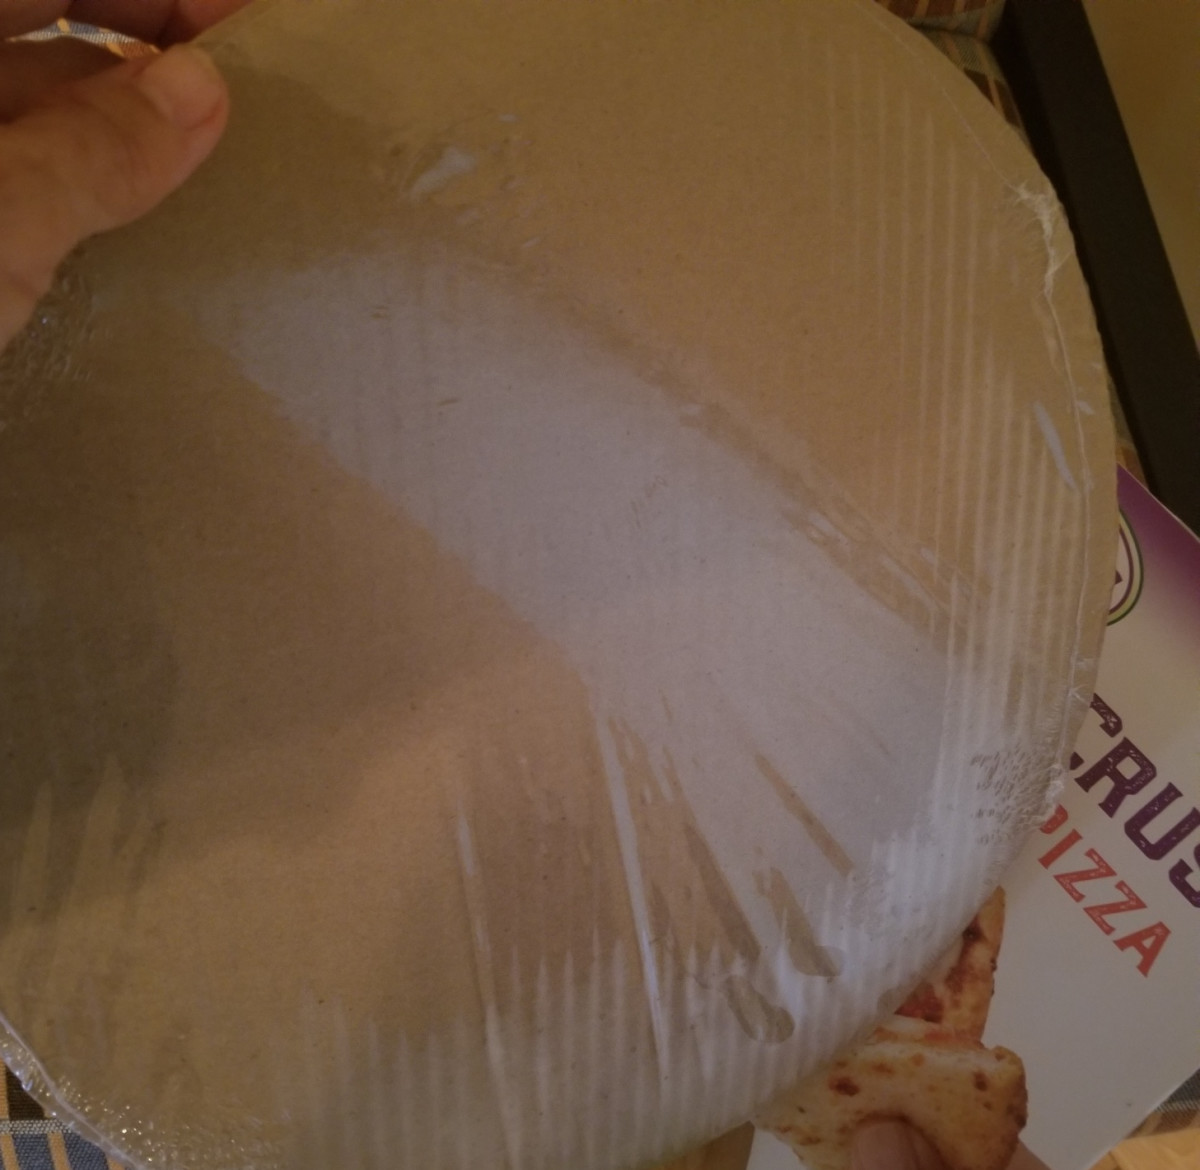 Use a spatula to slide the pizza from the oven to the cakeboard that it is included in the packaging.